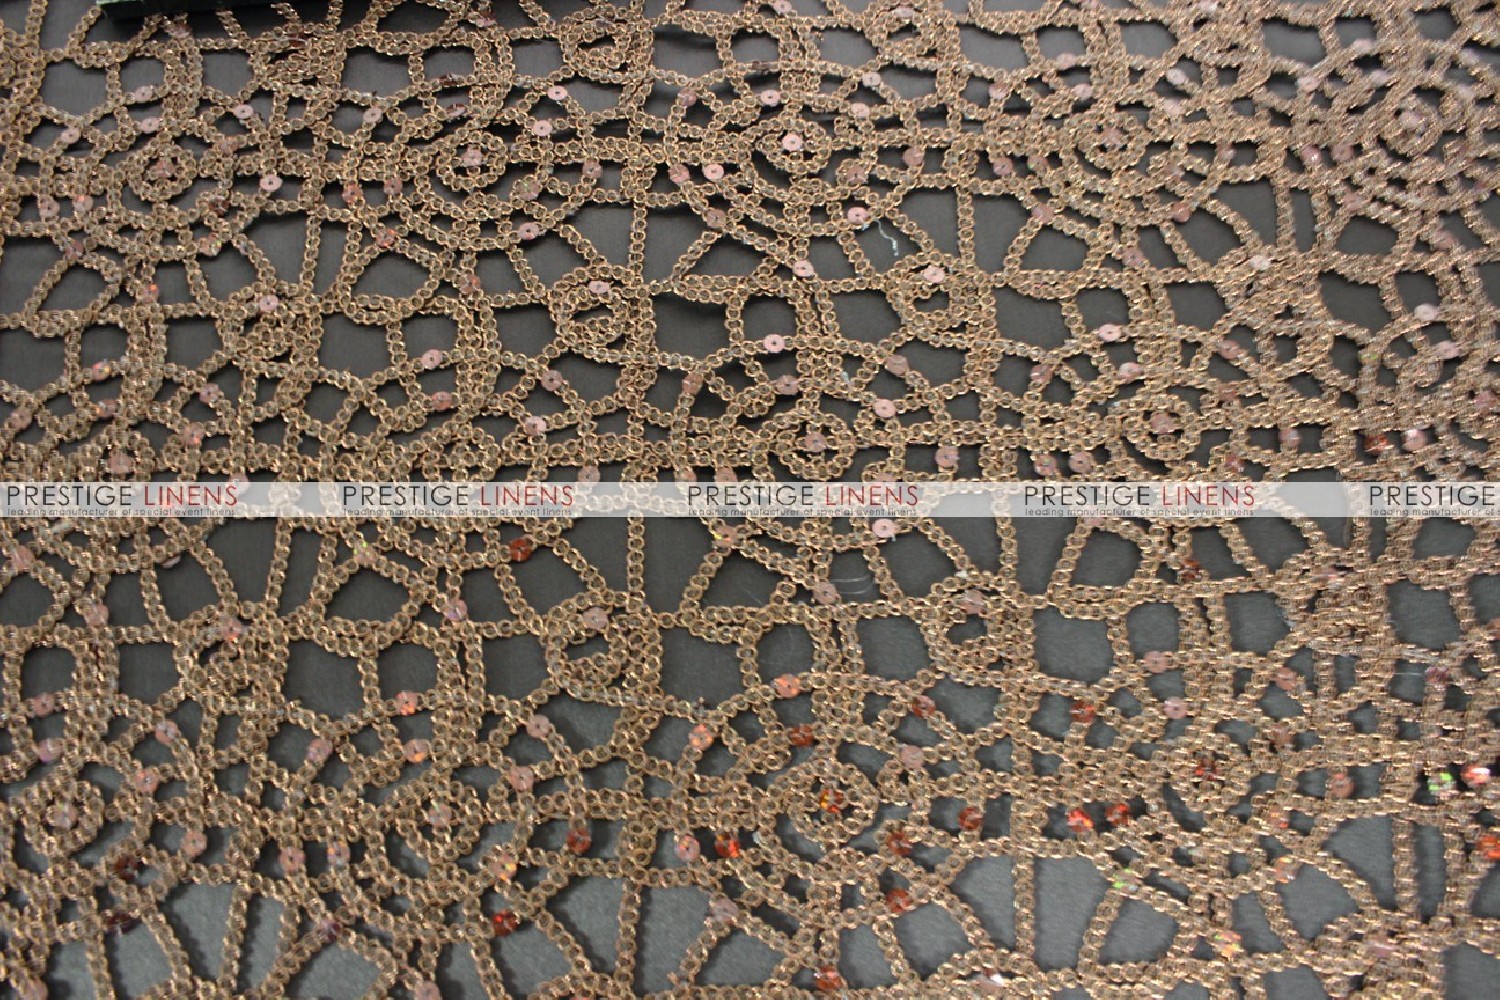 brown lace fabric